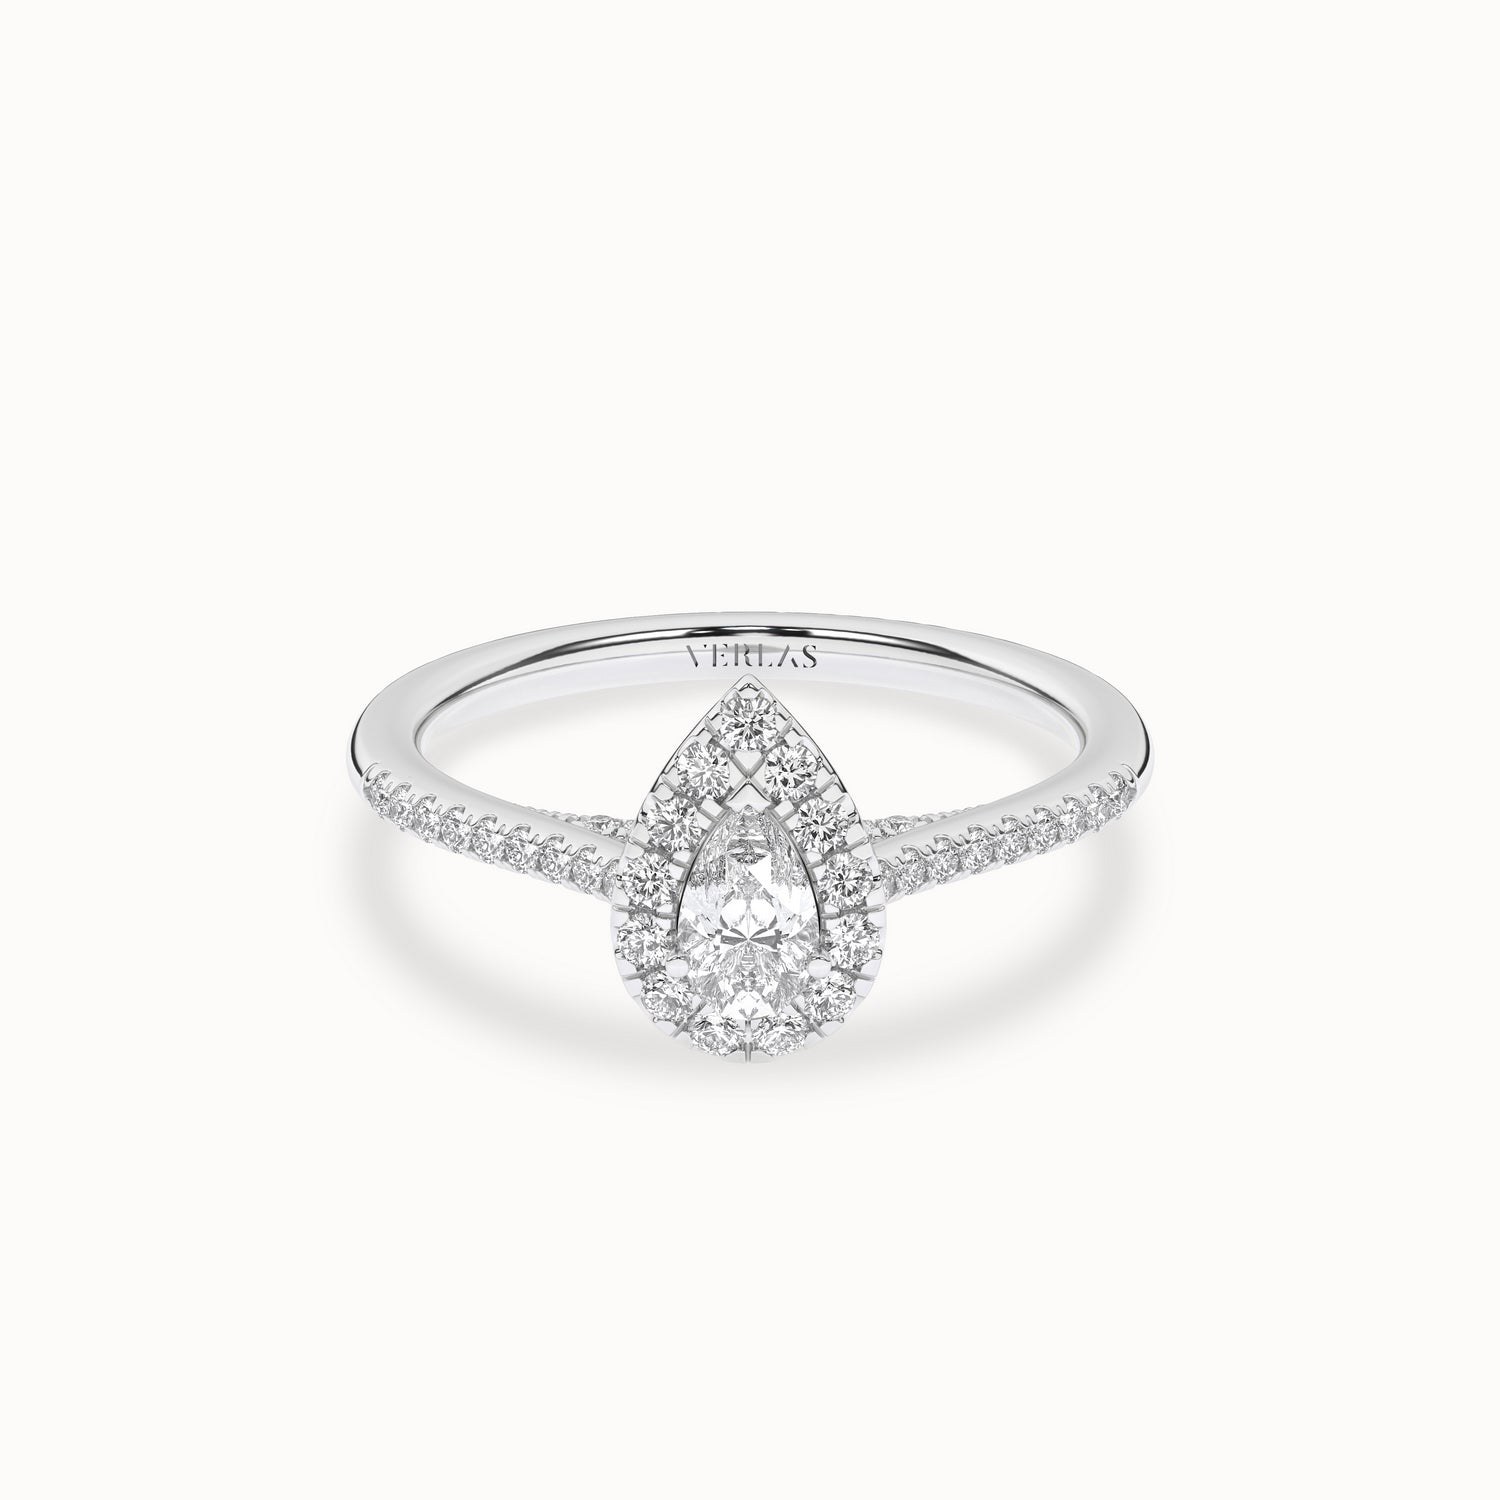 Signature Dewdrop Halo Ring_Product Angle_3/4Ct - 1